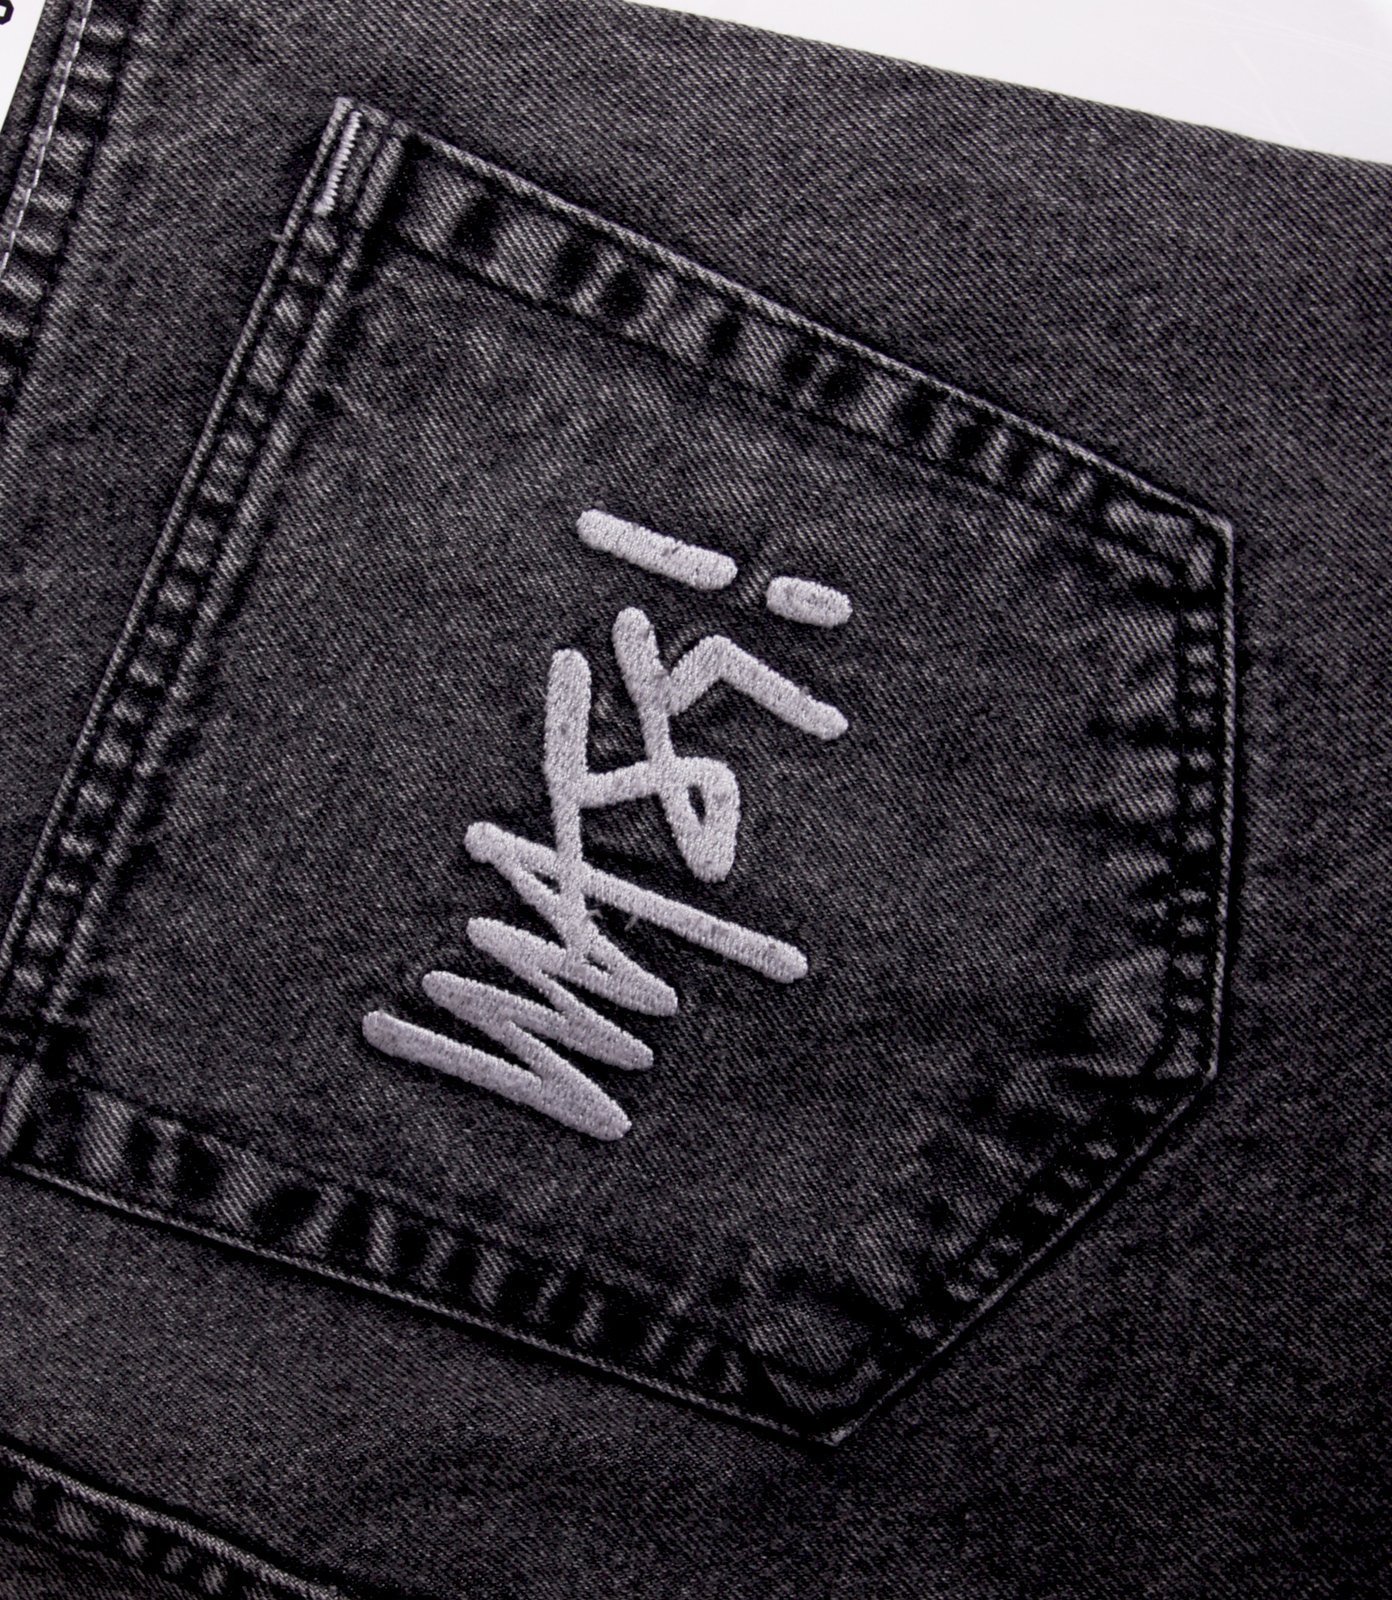 Mass SIGNATURE Jeans Tapered Fit Black Stone Washed